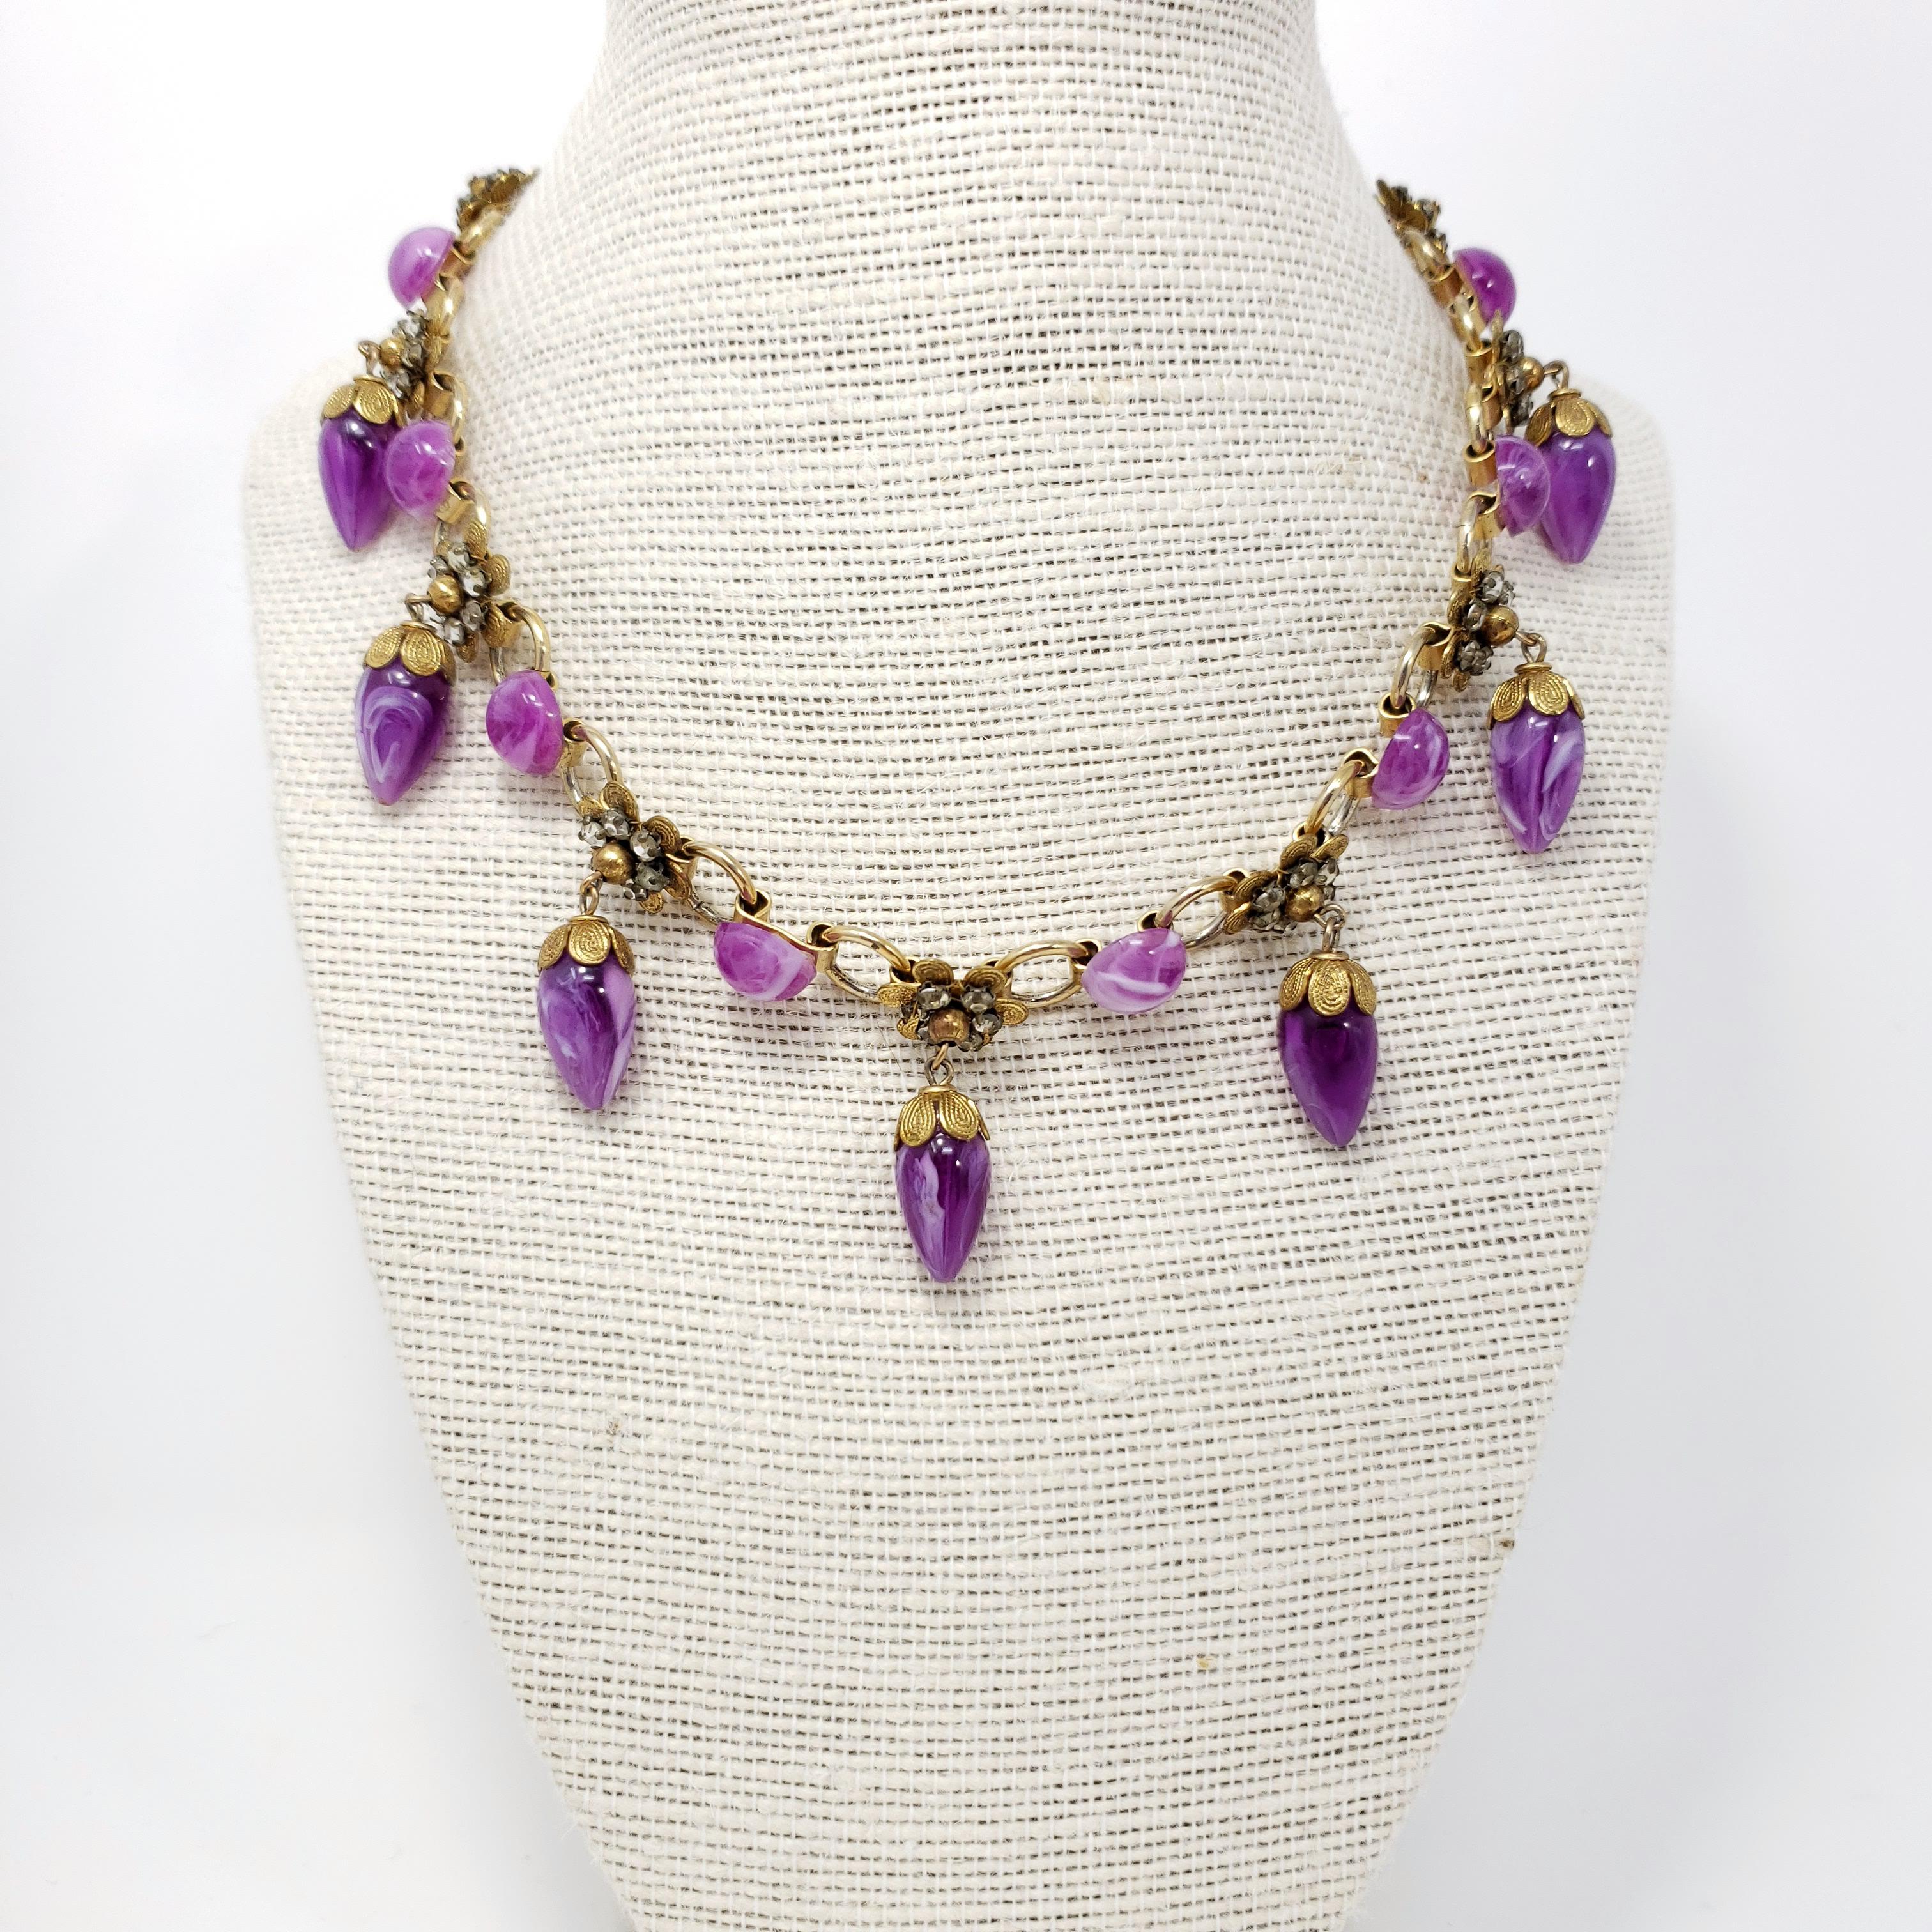 Retro floral necklace, featuring golden flower motifs accented with dangling violet crystals.

Gold-plated. Spring-ring clasp.